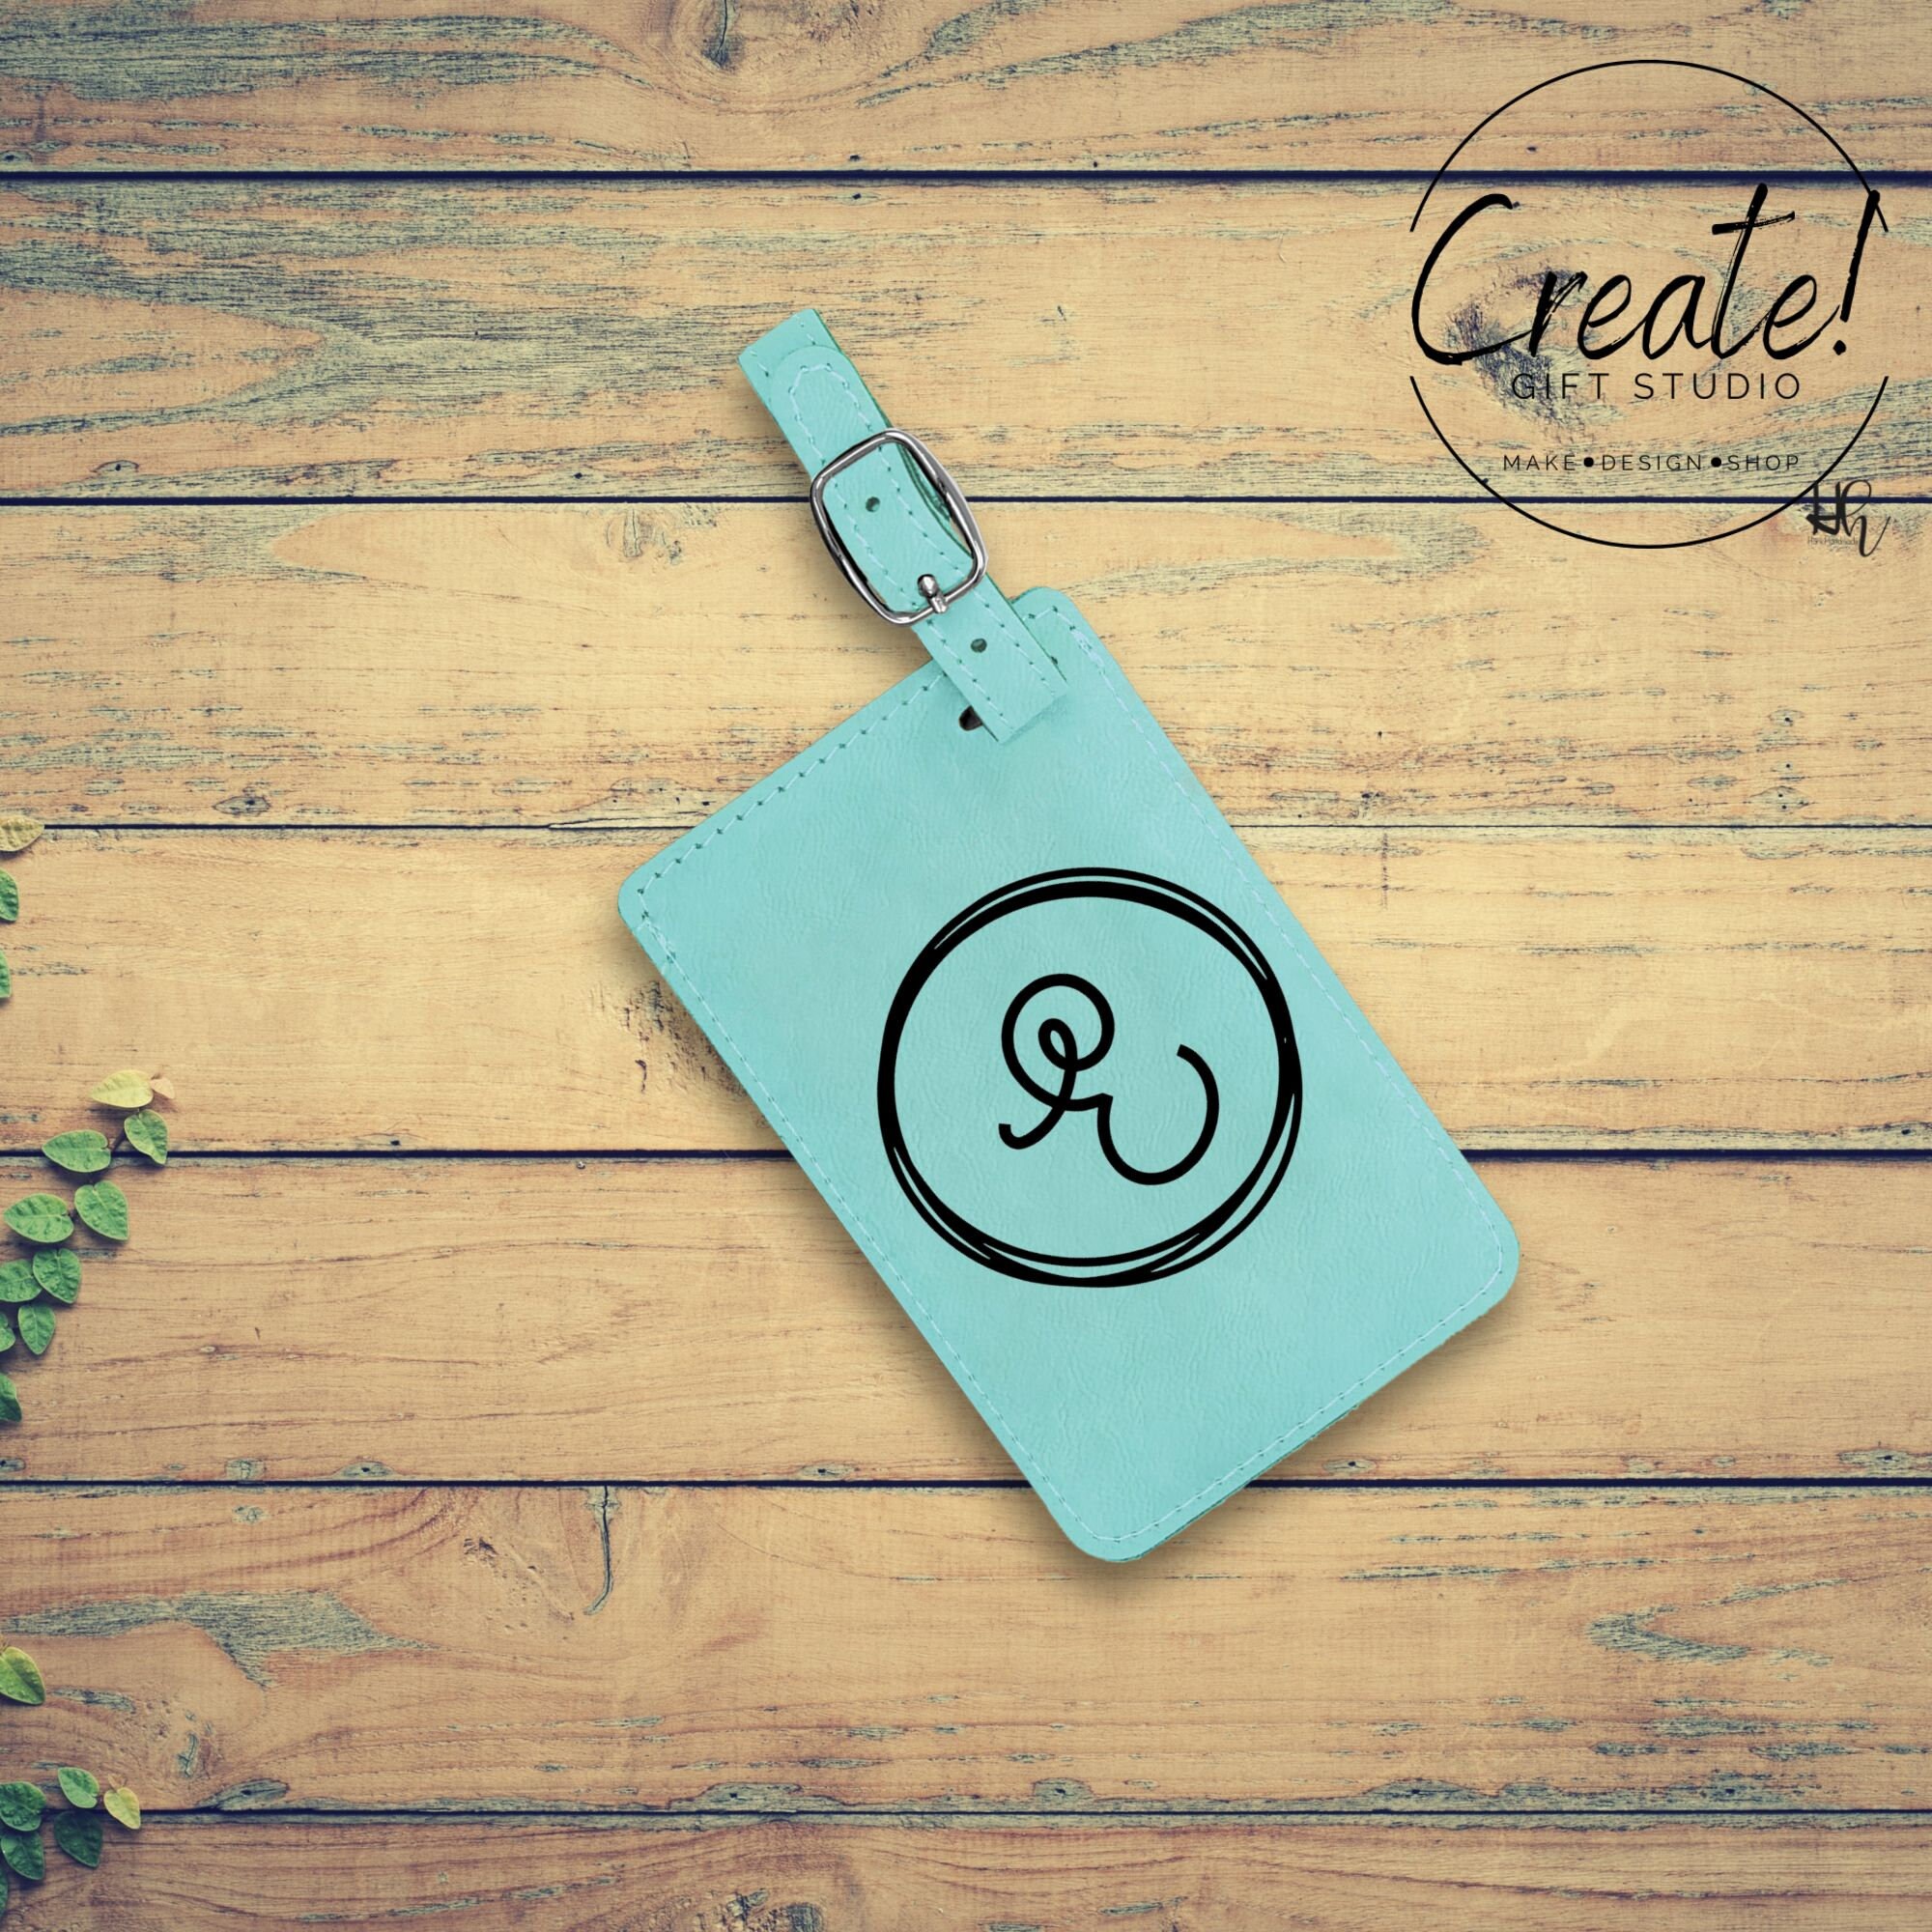 Personalized custom made welcome Luggage Tag, Bag Tag, Travel Tag